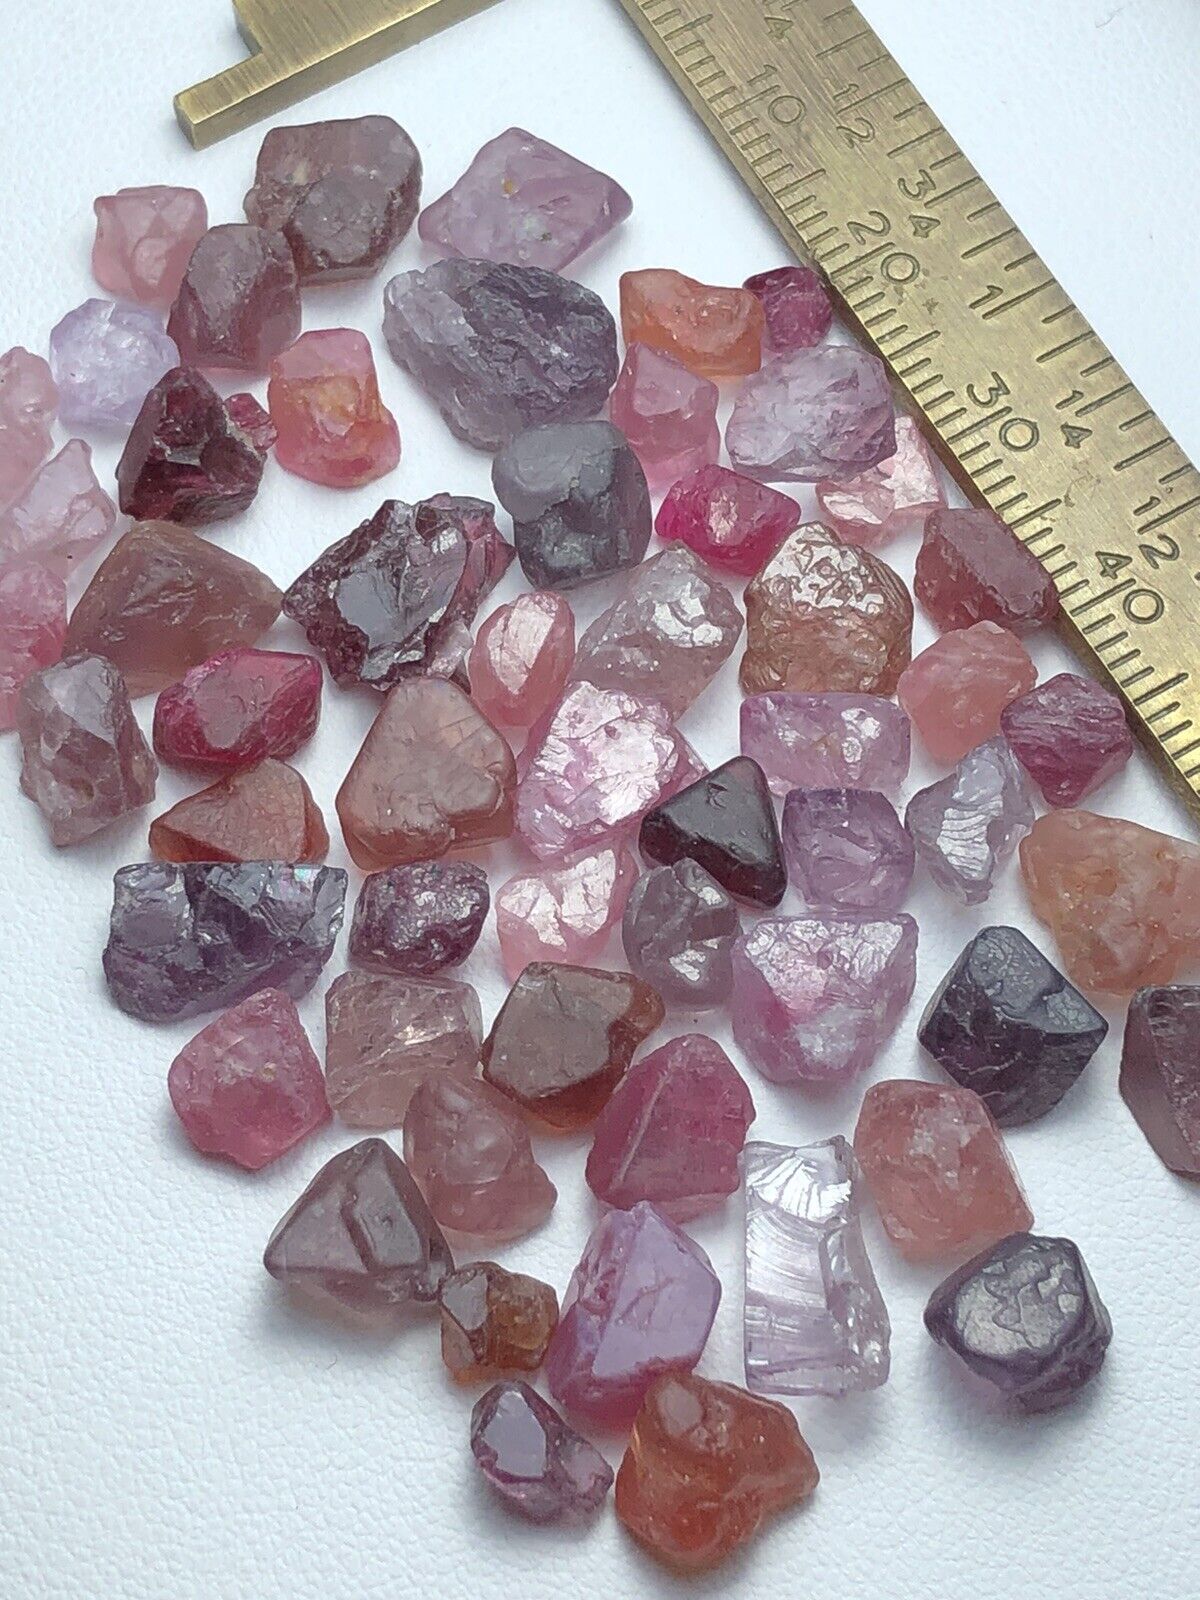 113 Crt / 55 Piece /Natural Multi Spinel Mix Rough Crystals From Burma,